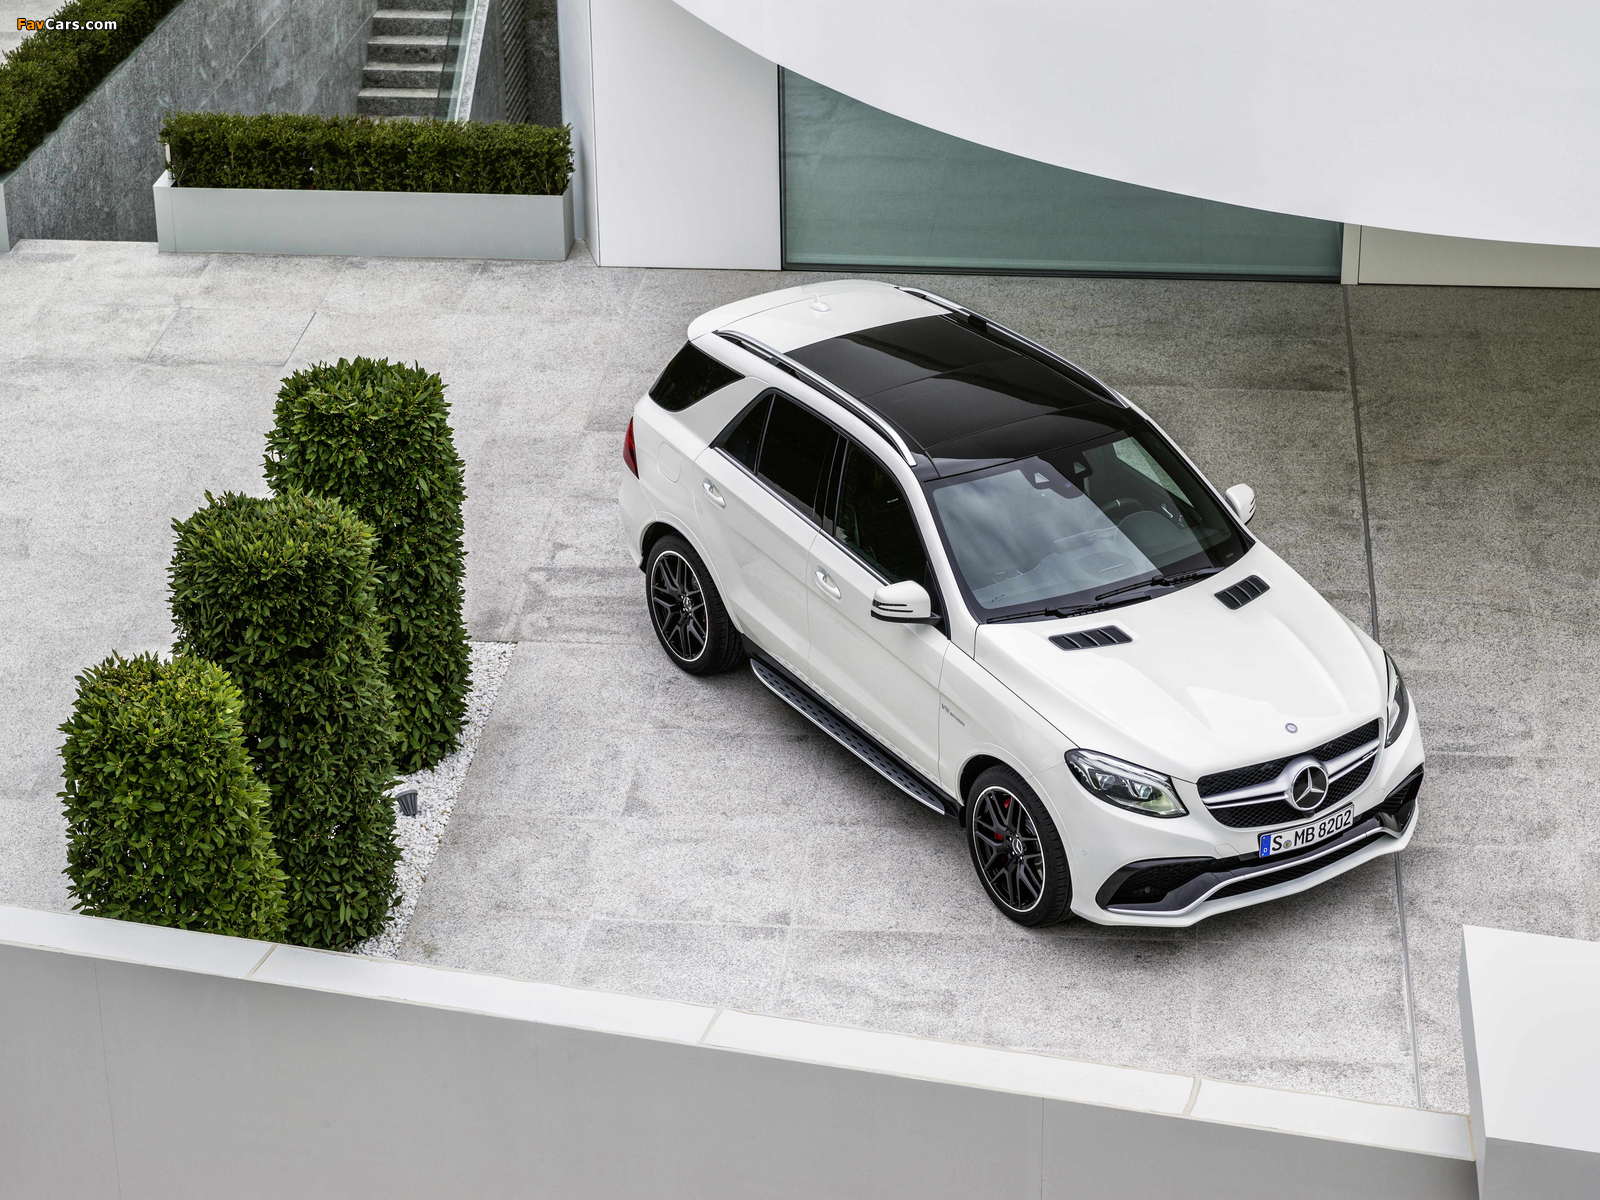 Mercedes-AMG GLE 63 S 4MATIC (W166) 2015 pictures (1600 x 1200)